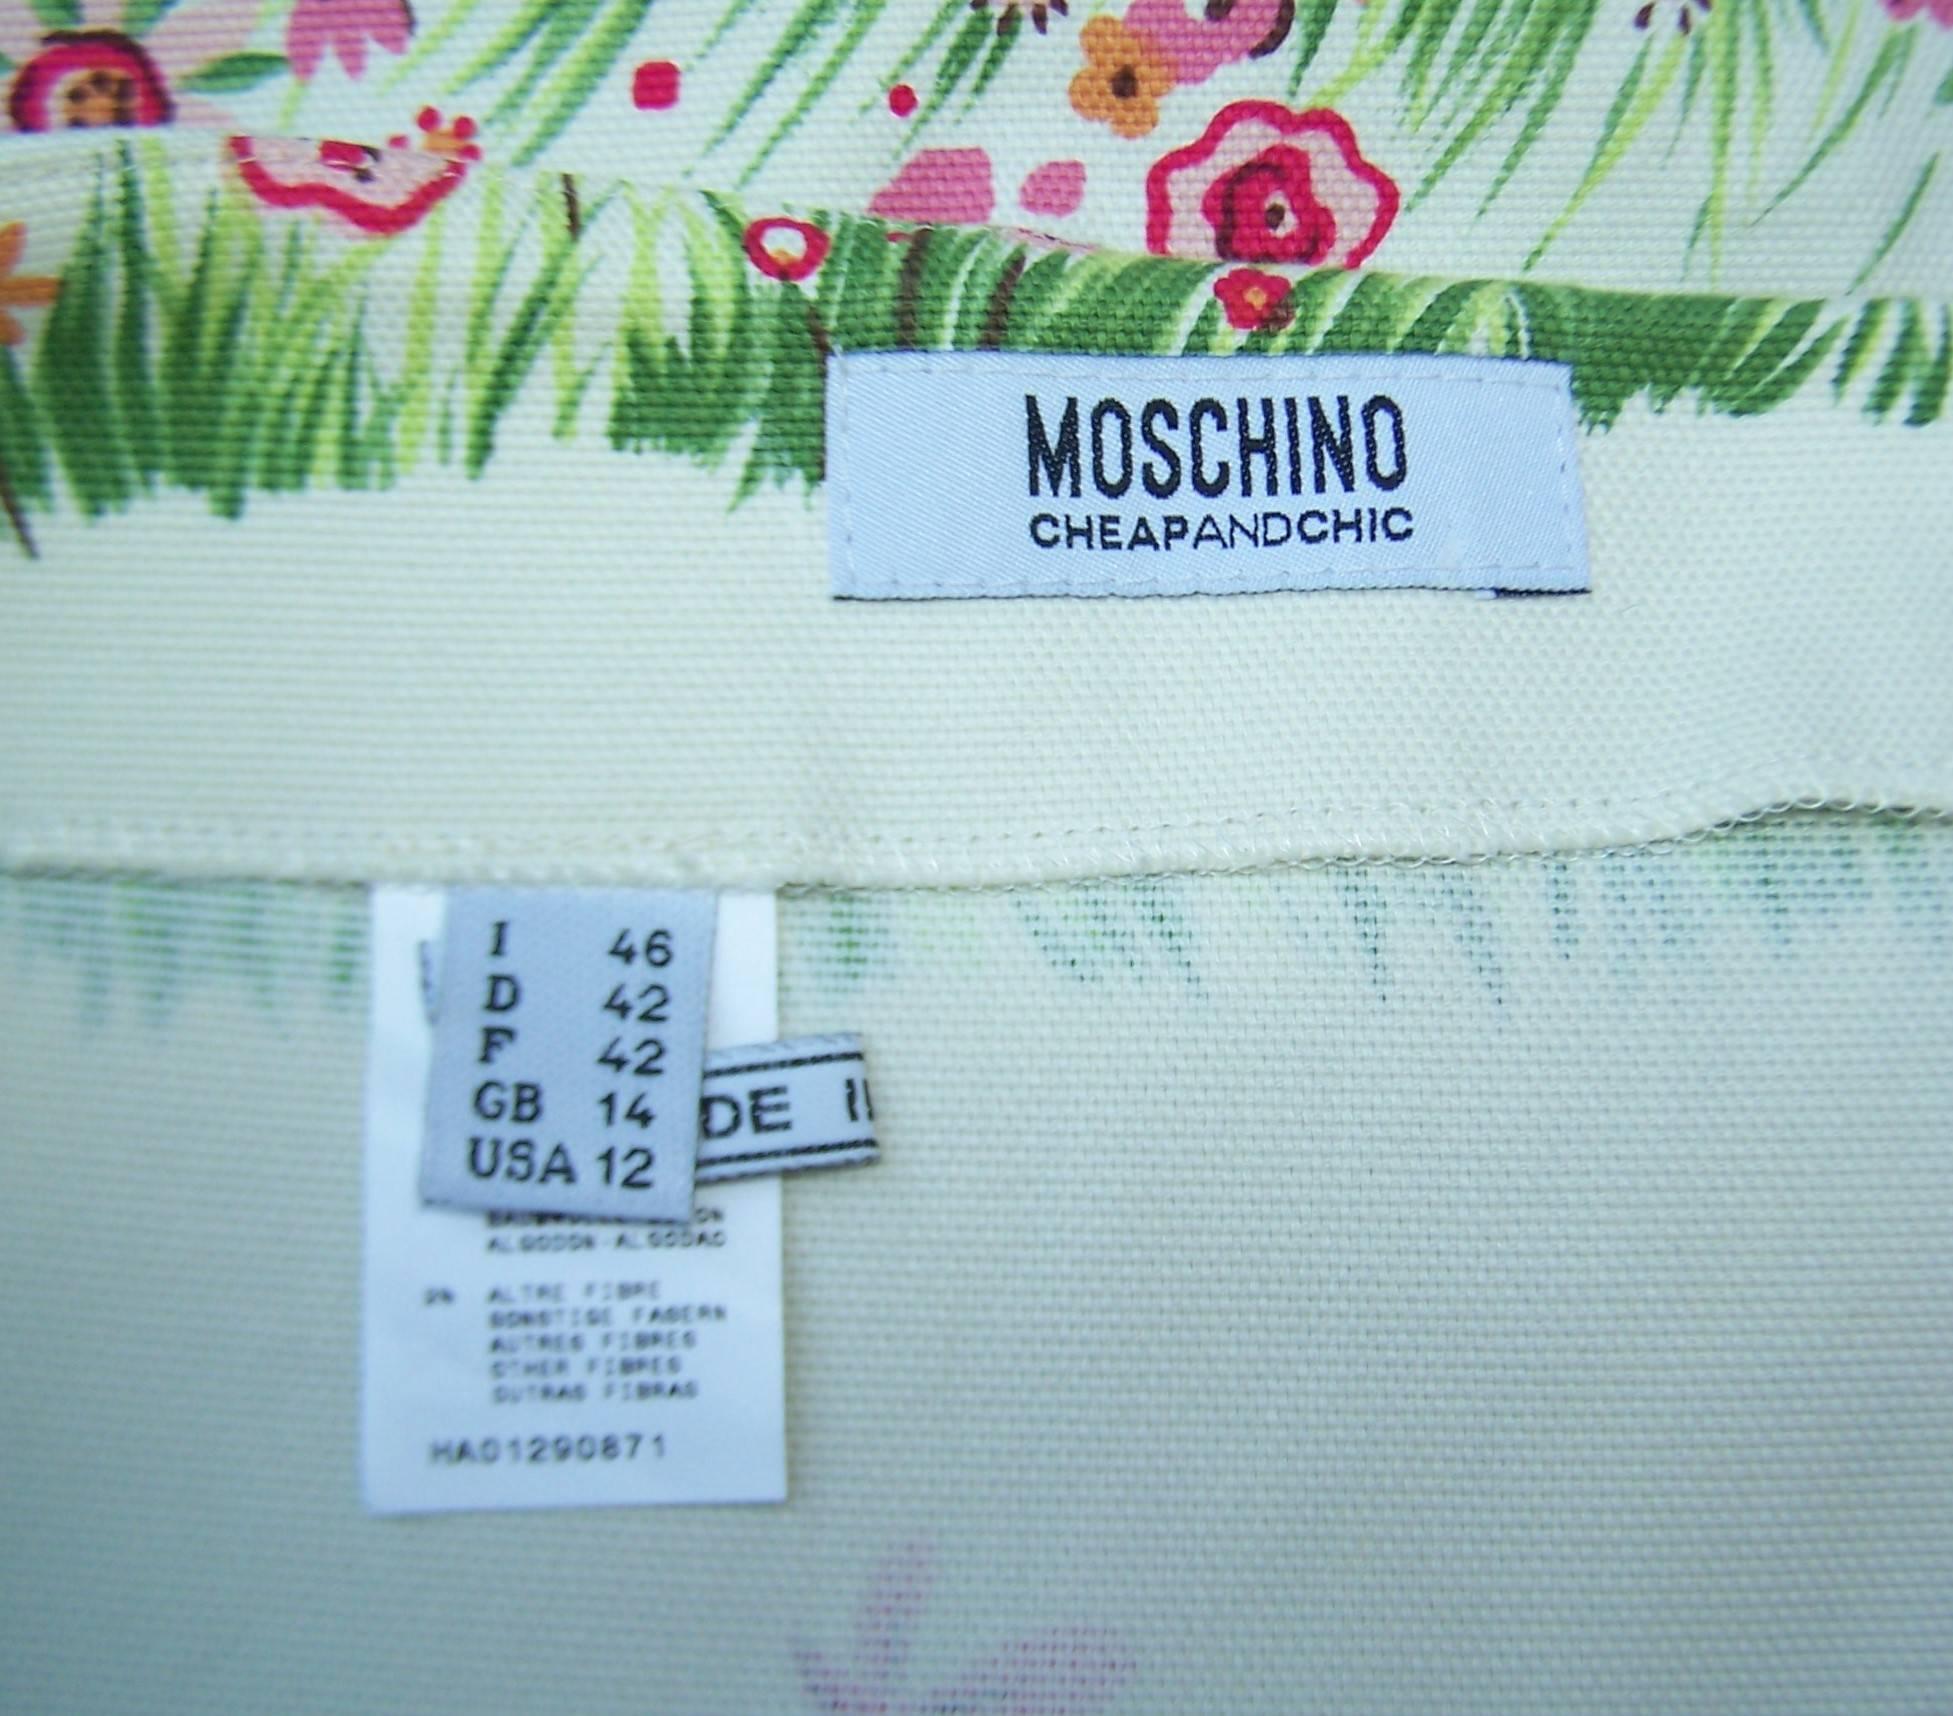 C.1990 Moschino Cheap And Chic Fun Floral Cotton Skirt 2